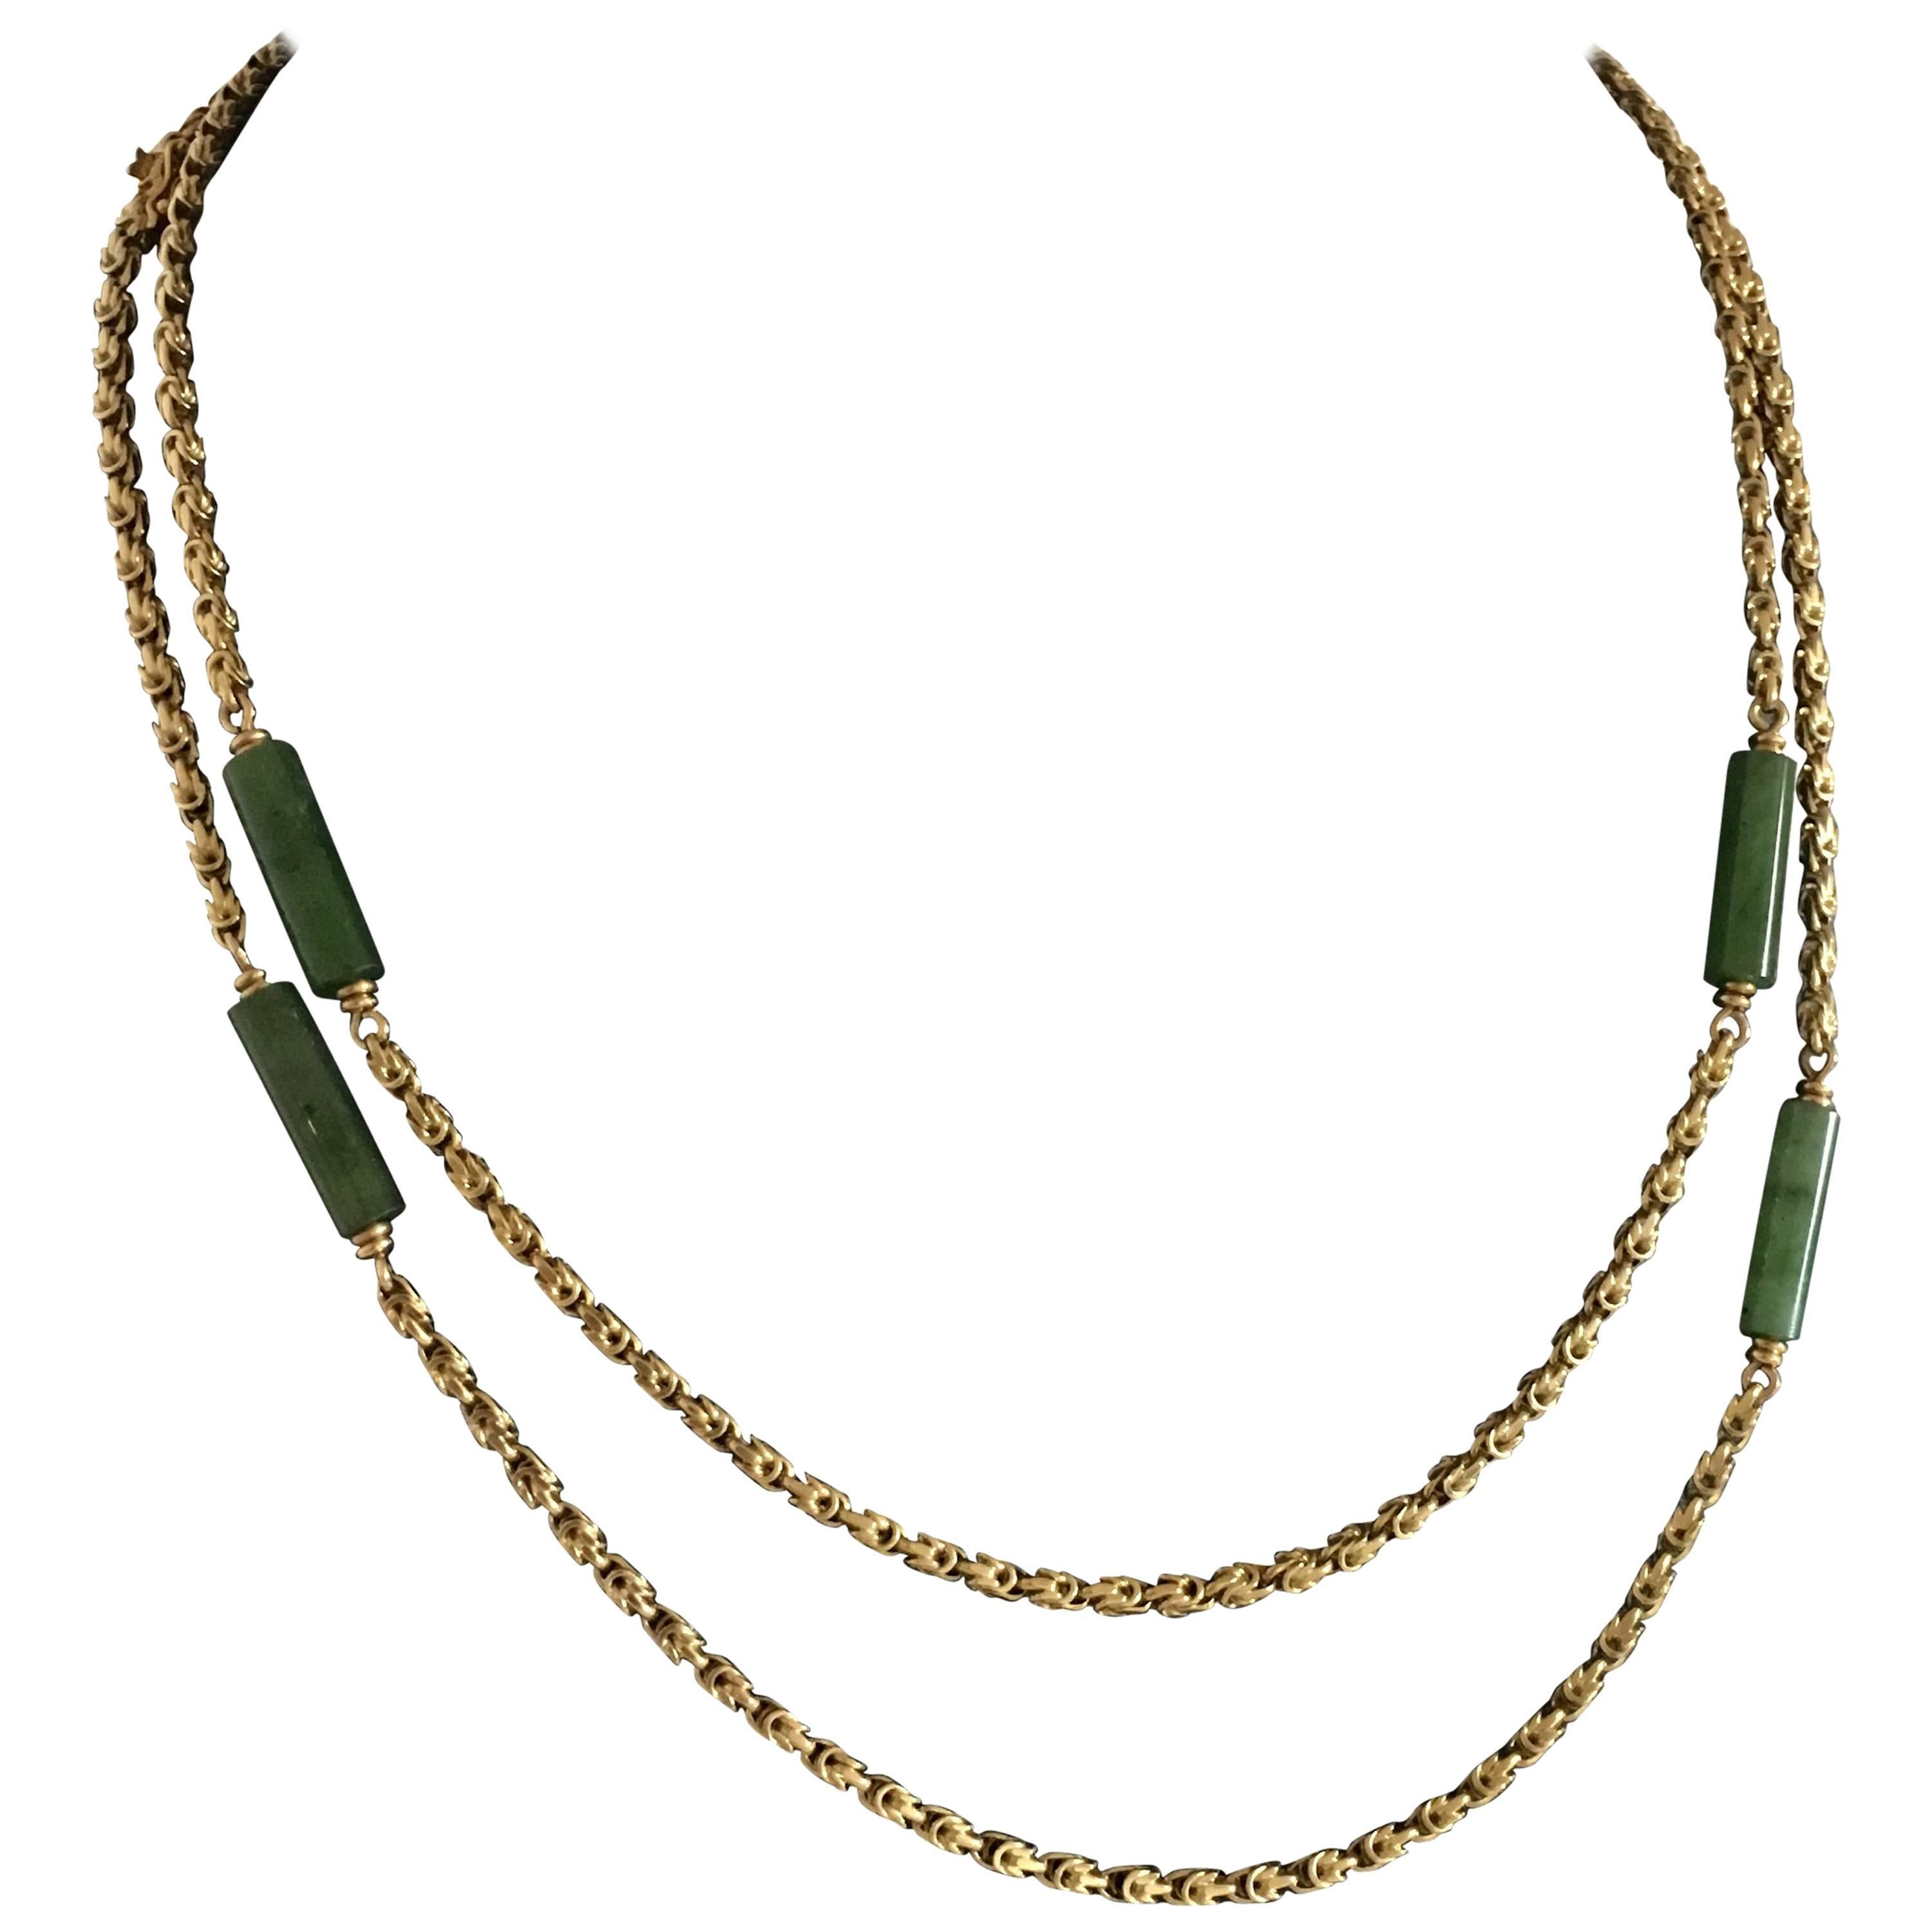 Georg Jensen Gold Collier Necklace Ornamented with Six Pieces of Jade Stone